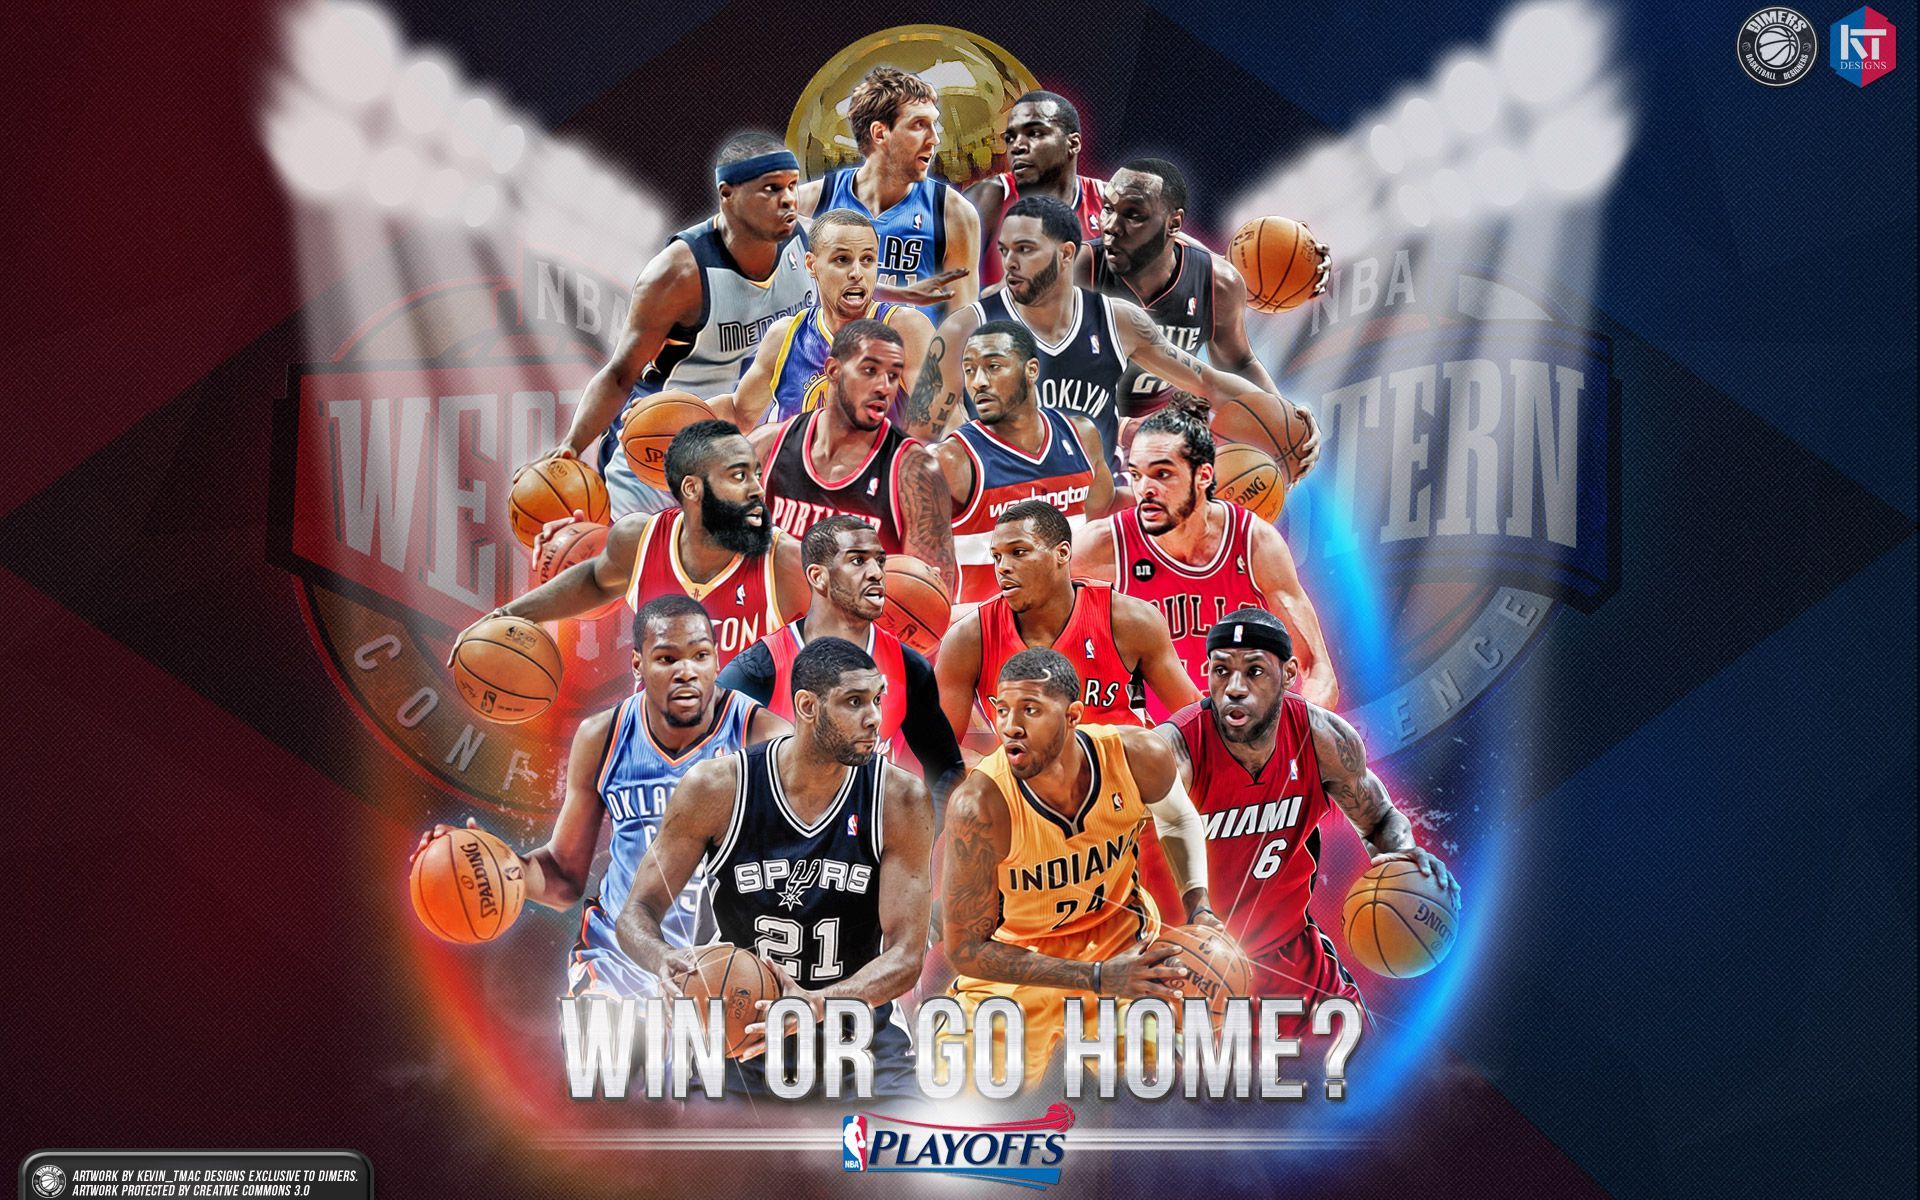 Uncategorized NBA Wallpapers | Basketball Wallpapers at ...